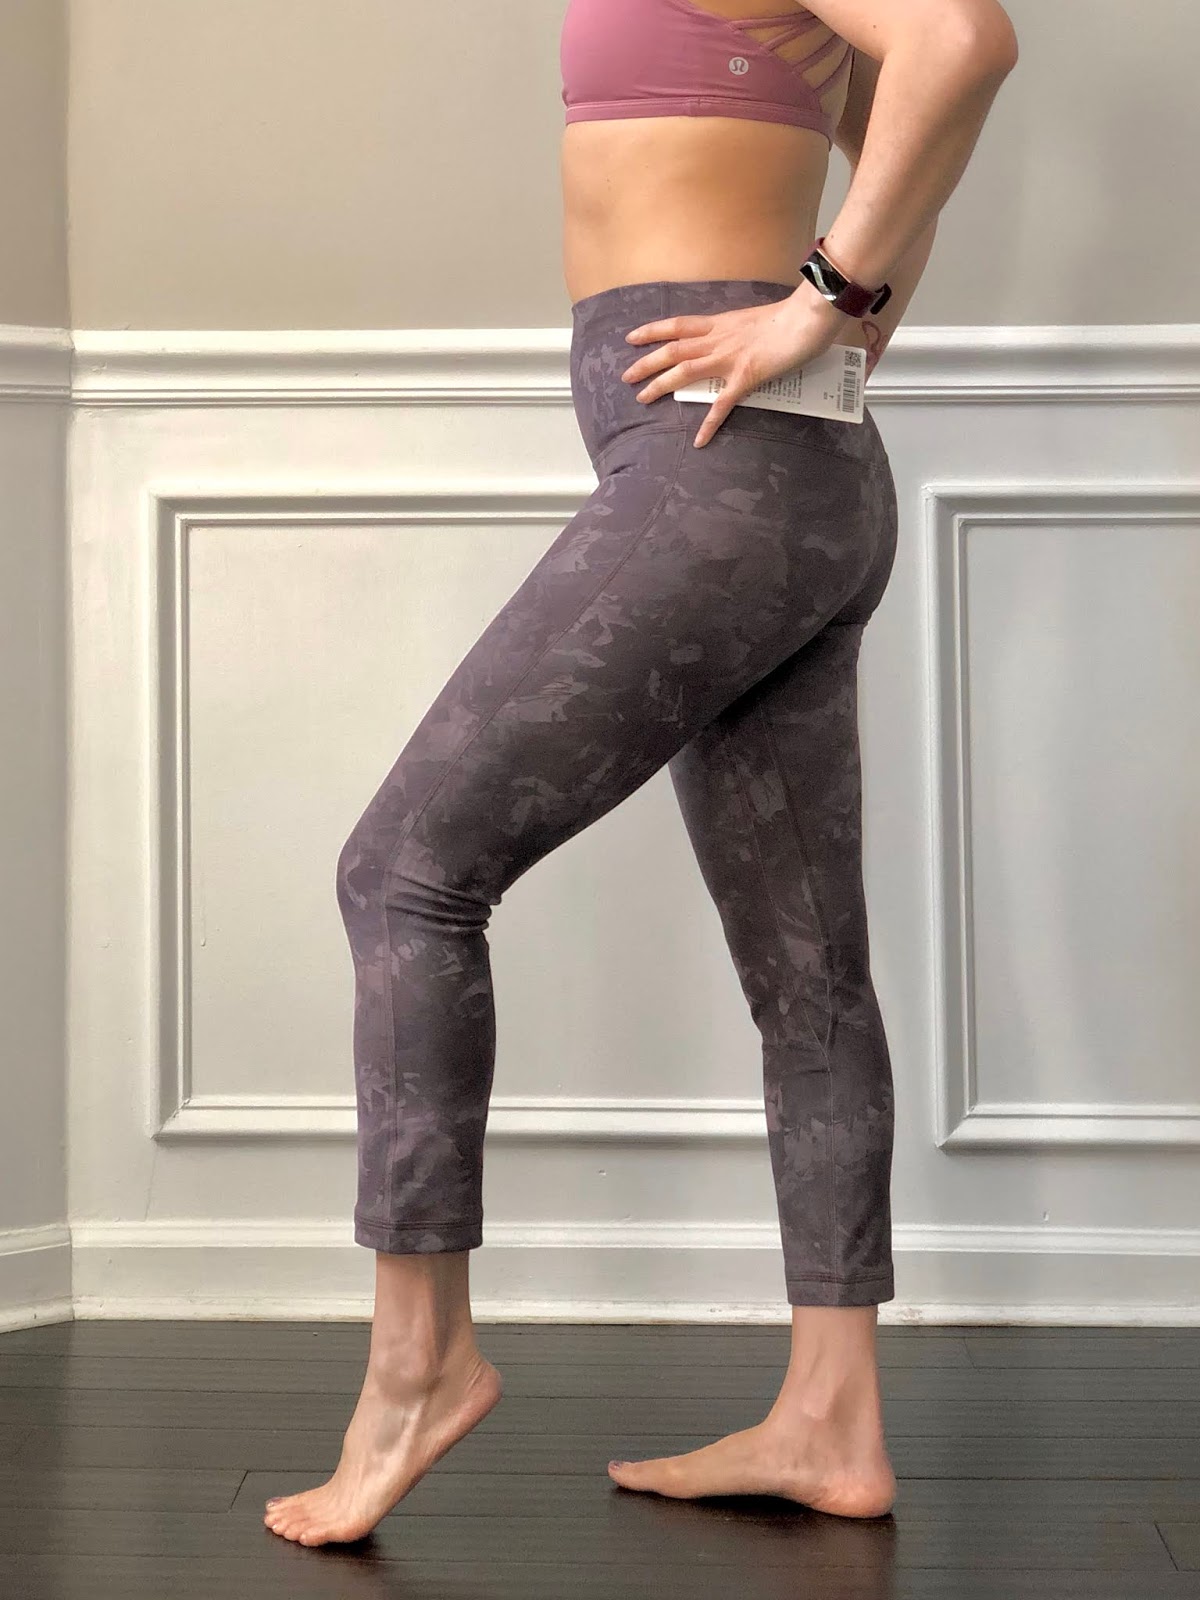 Lululemon Spring Try On Haul - New Diamond Dye Aligns & Trying Base Pace! 